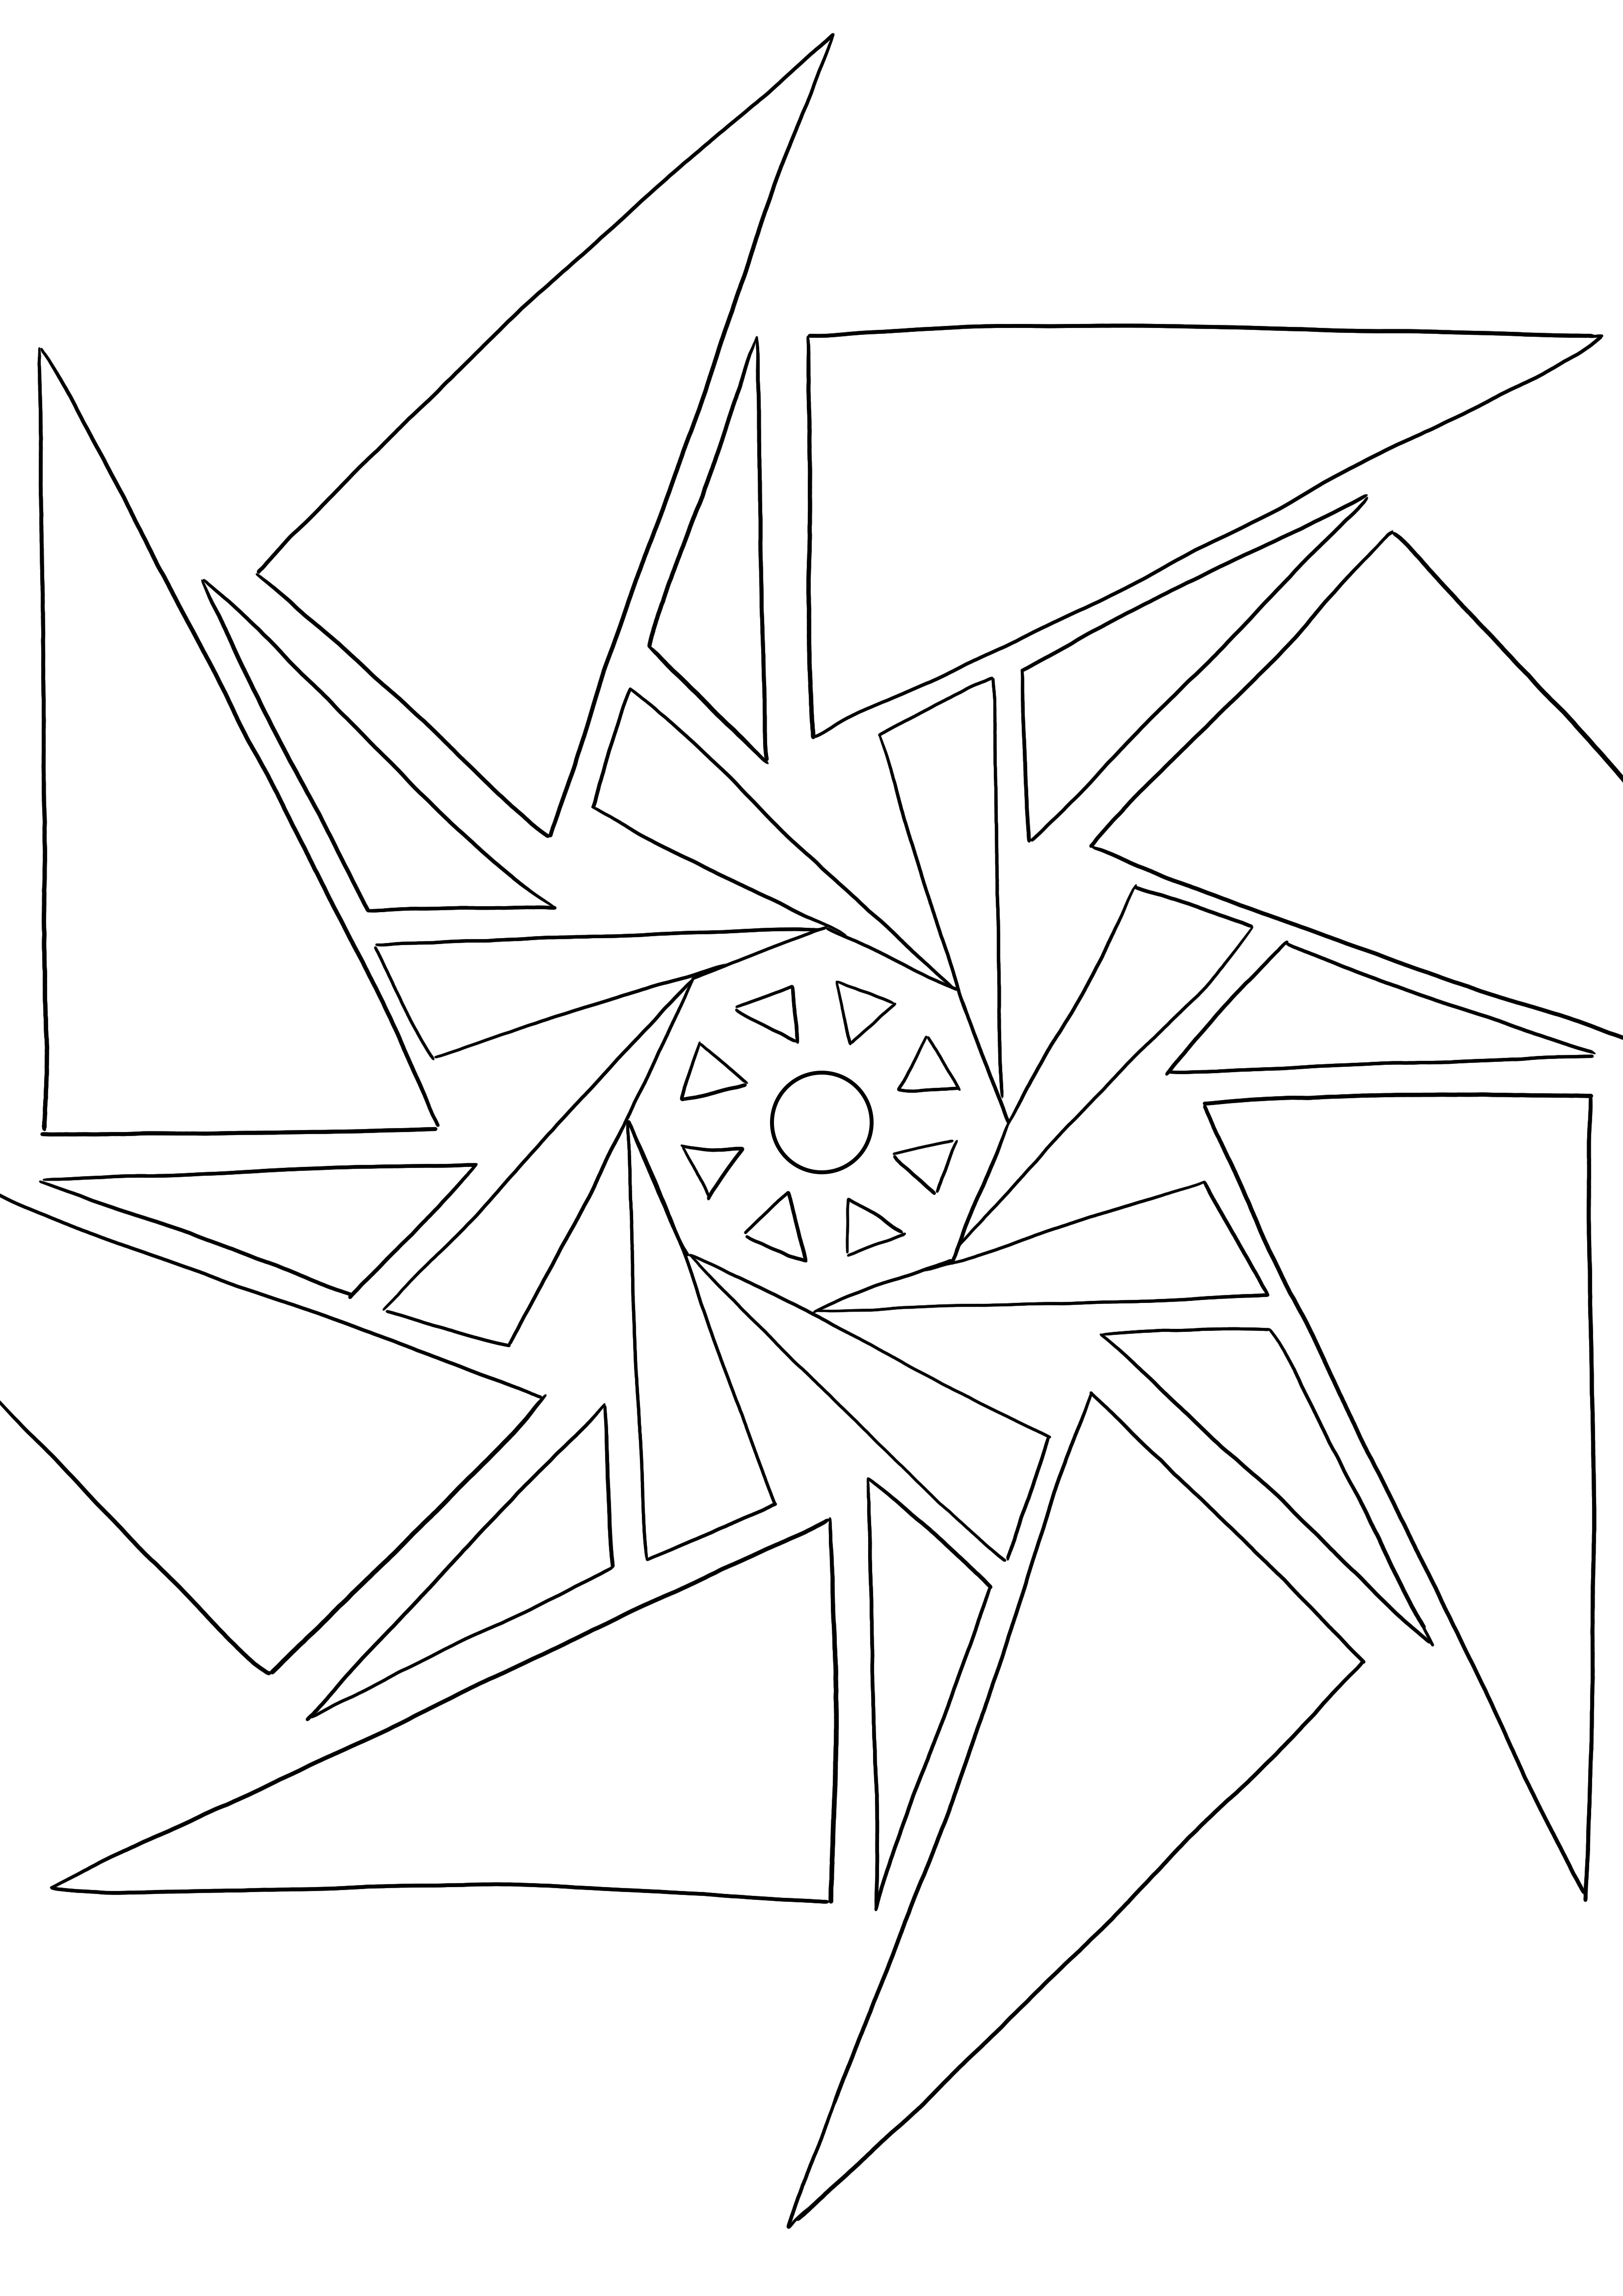 A coloring image free to download of Geometric Mandala for kids to spend their free time